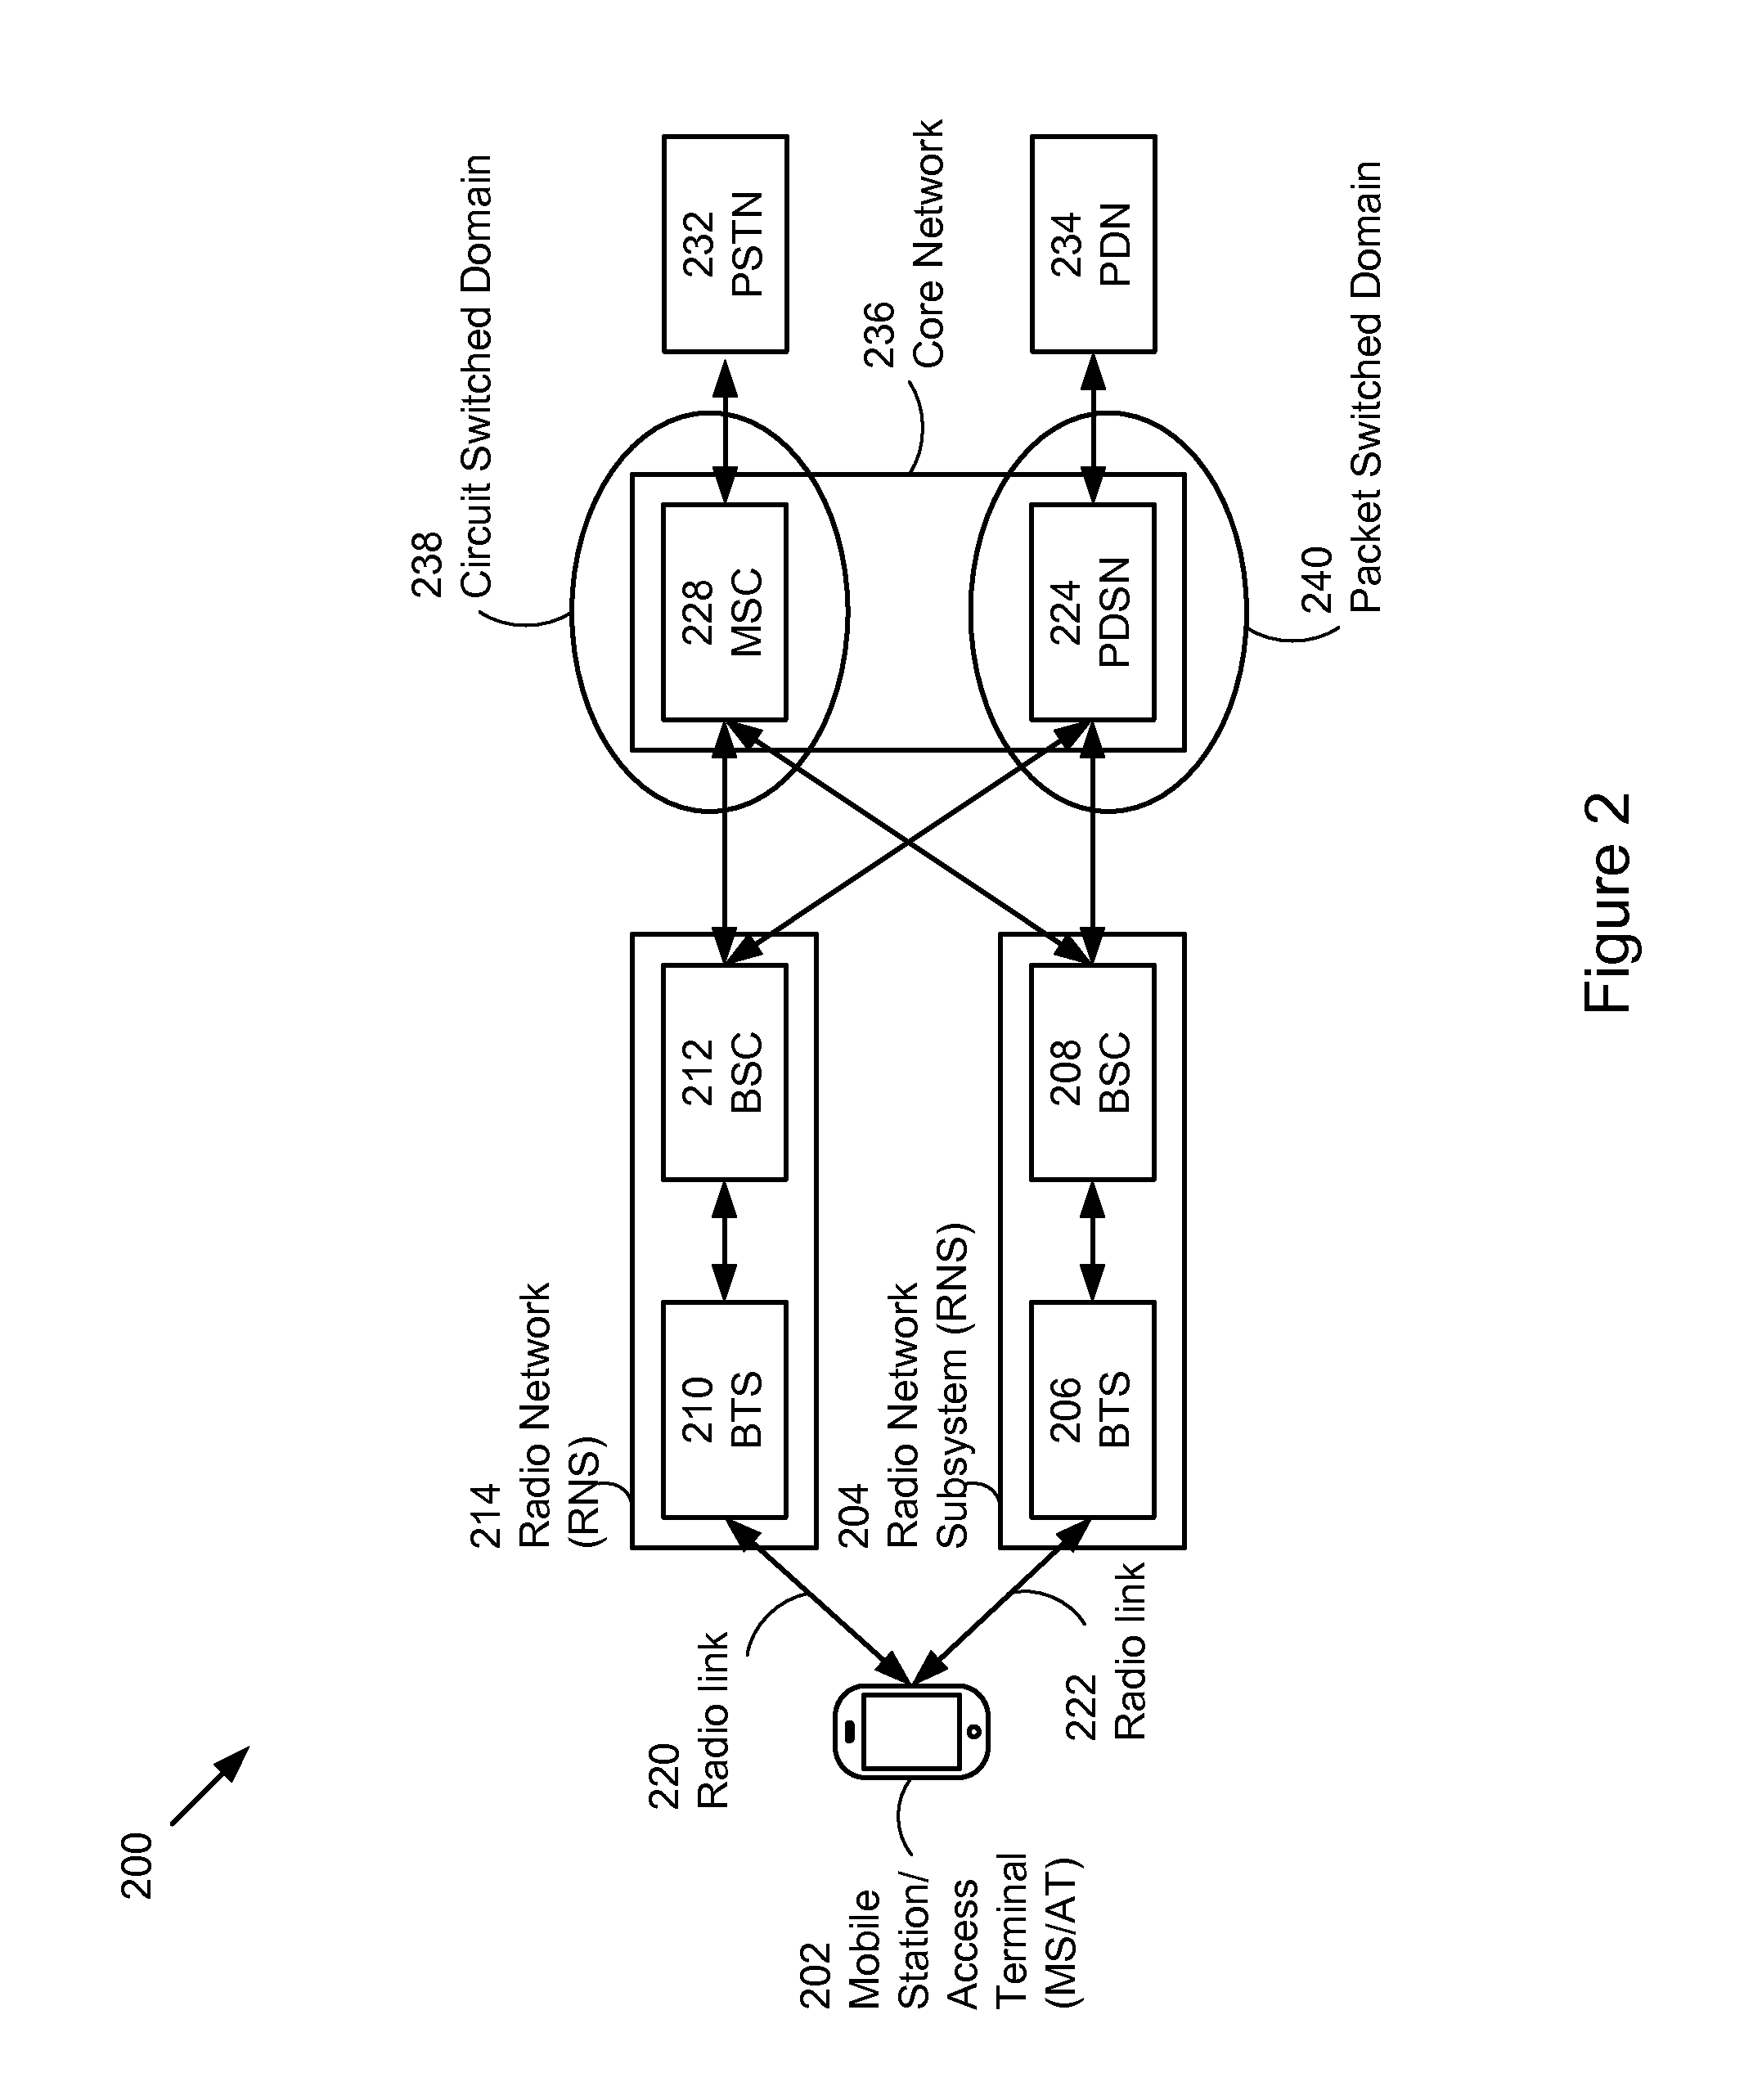 Voice and data connection control in a mobile device